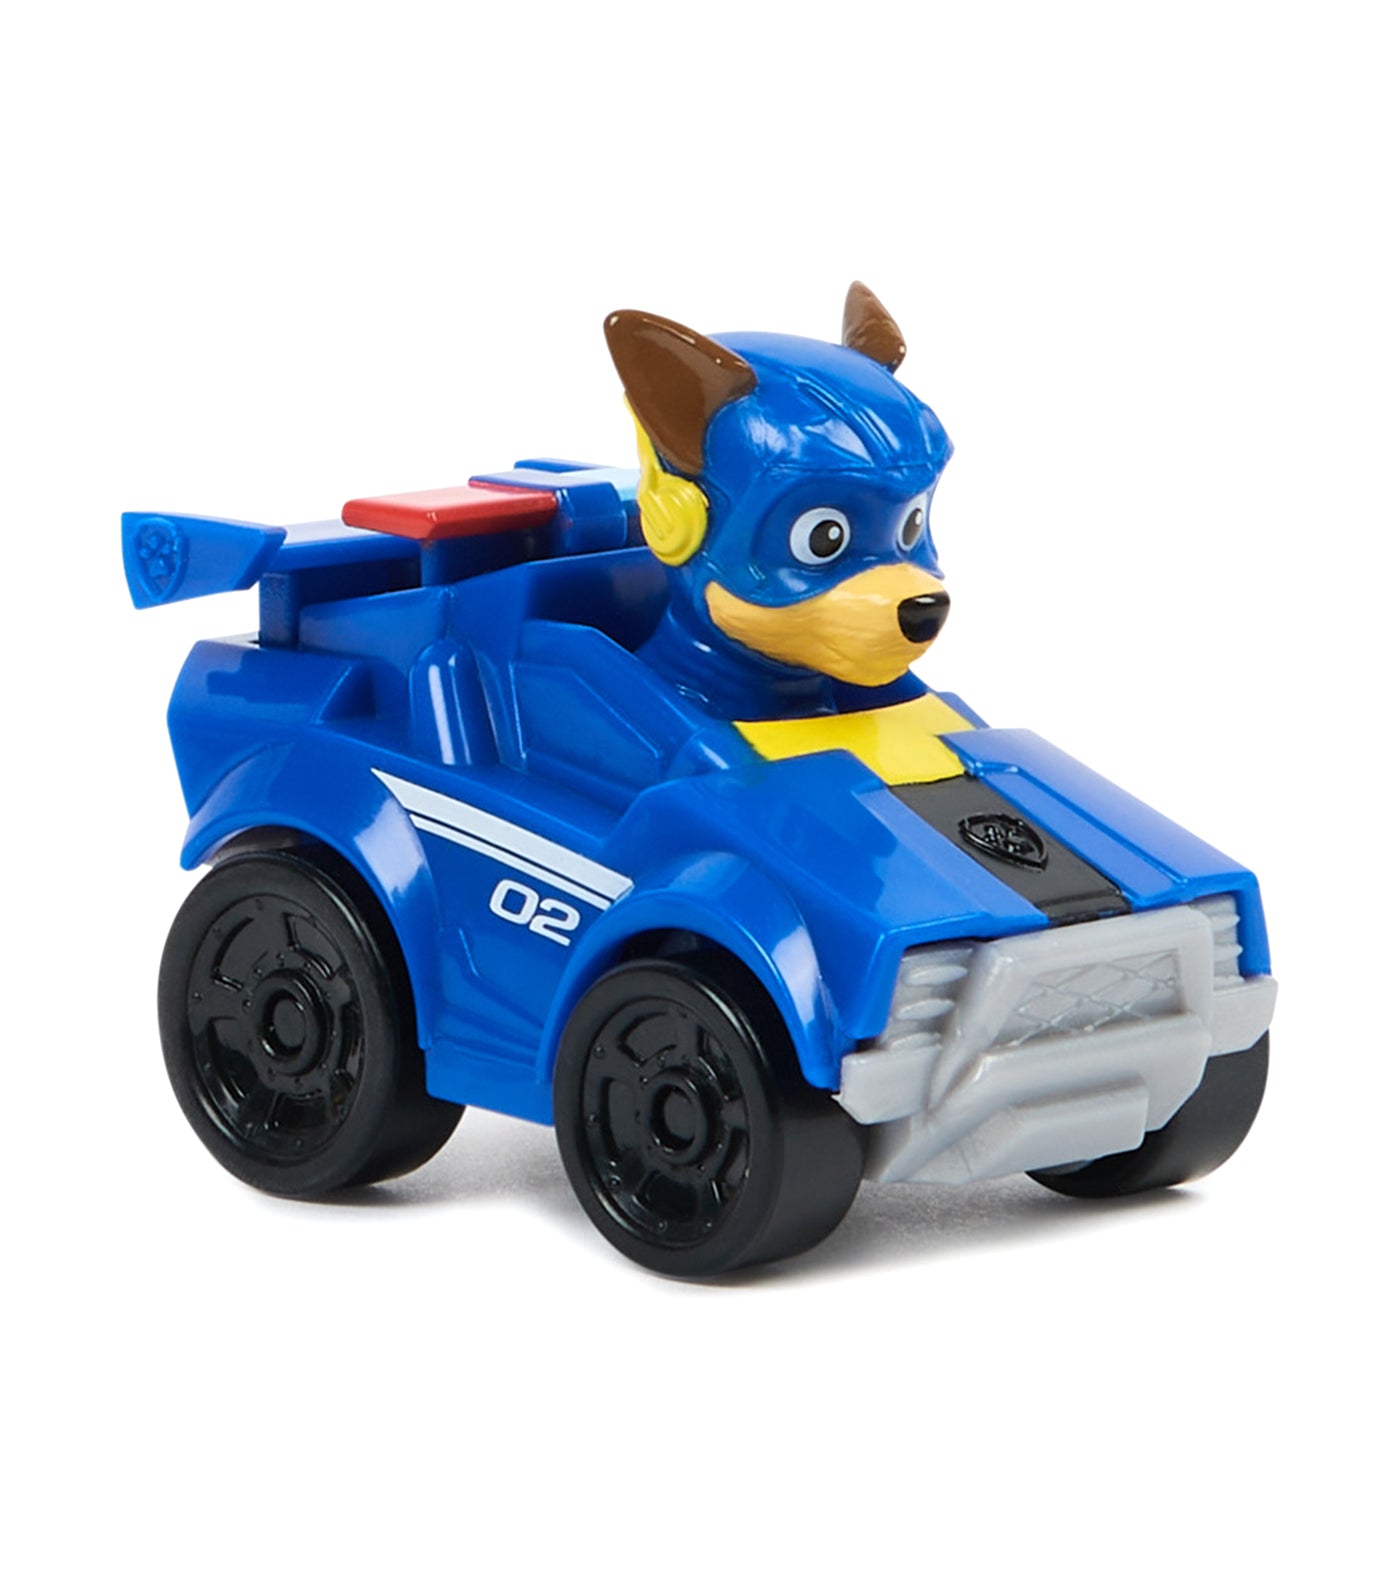 Chase Pup Squad Racers